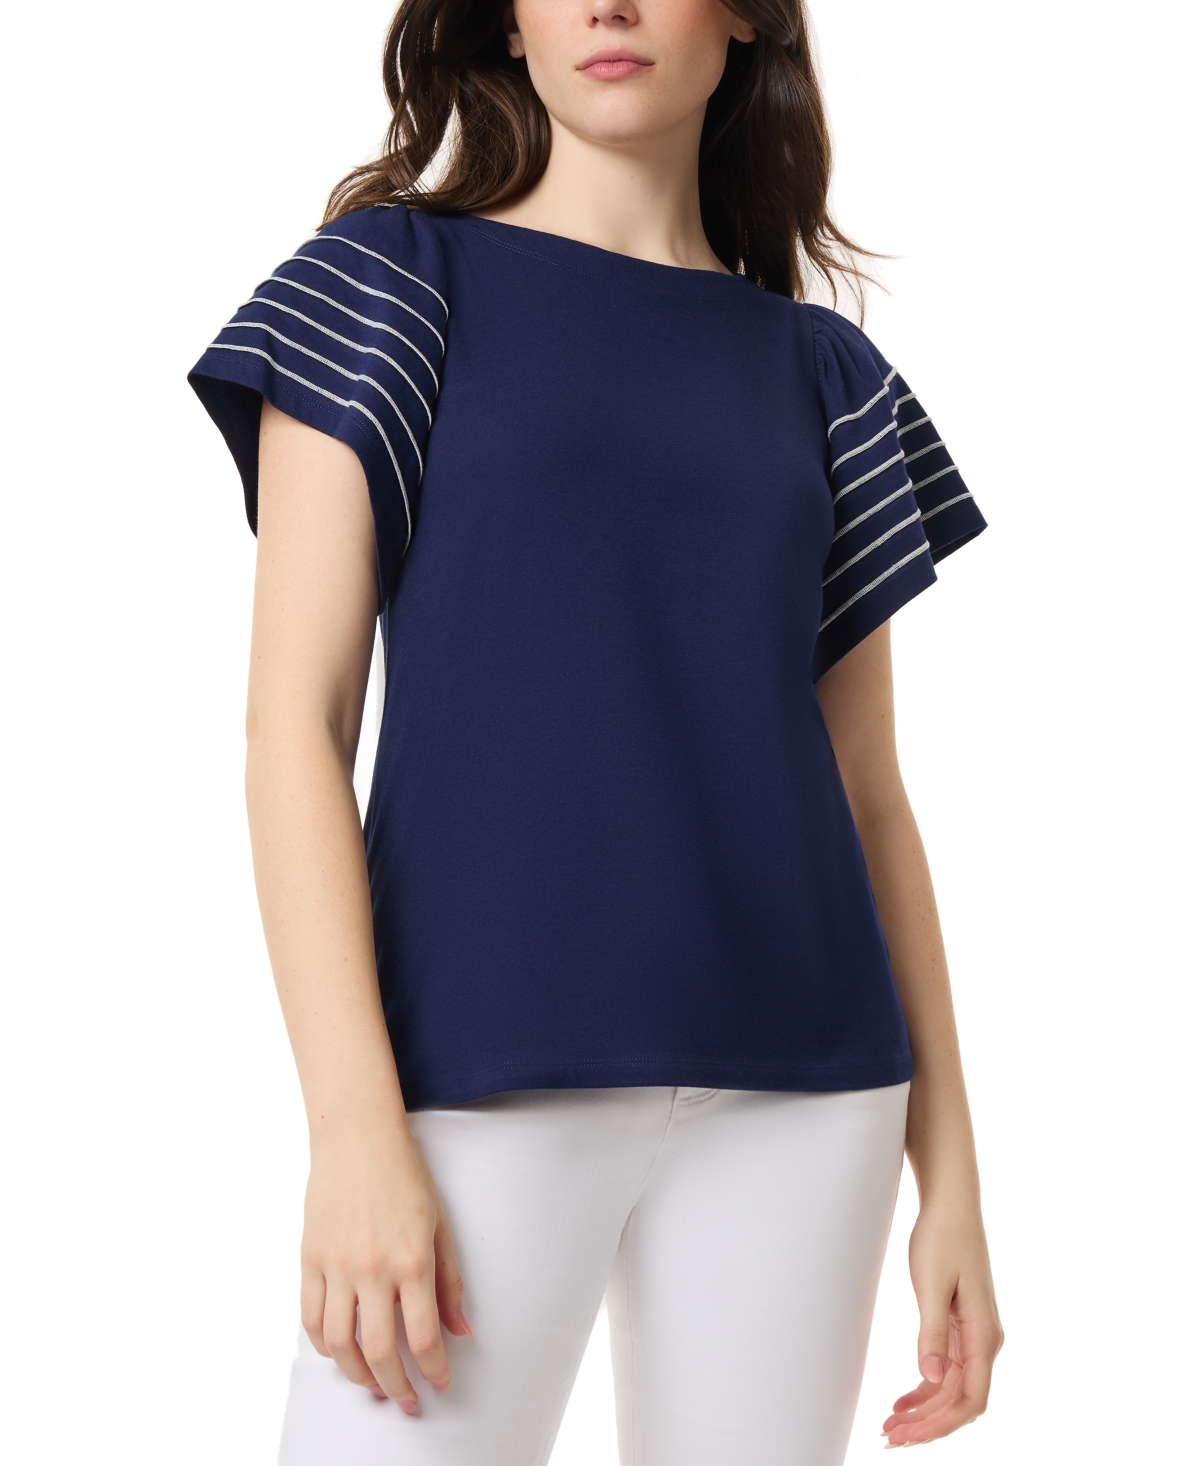 Women's Boat-Neck Flutter-Sleeve Top - Bright Orc